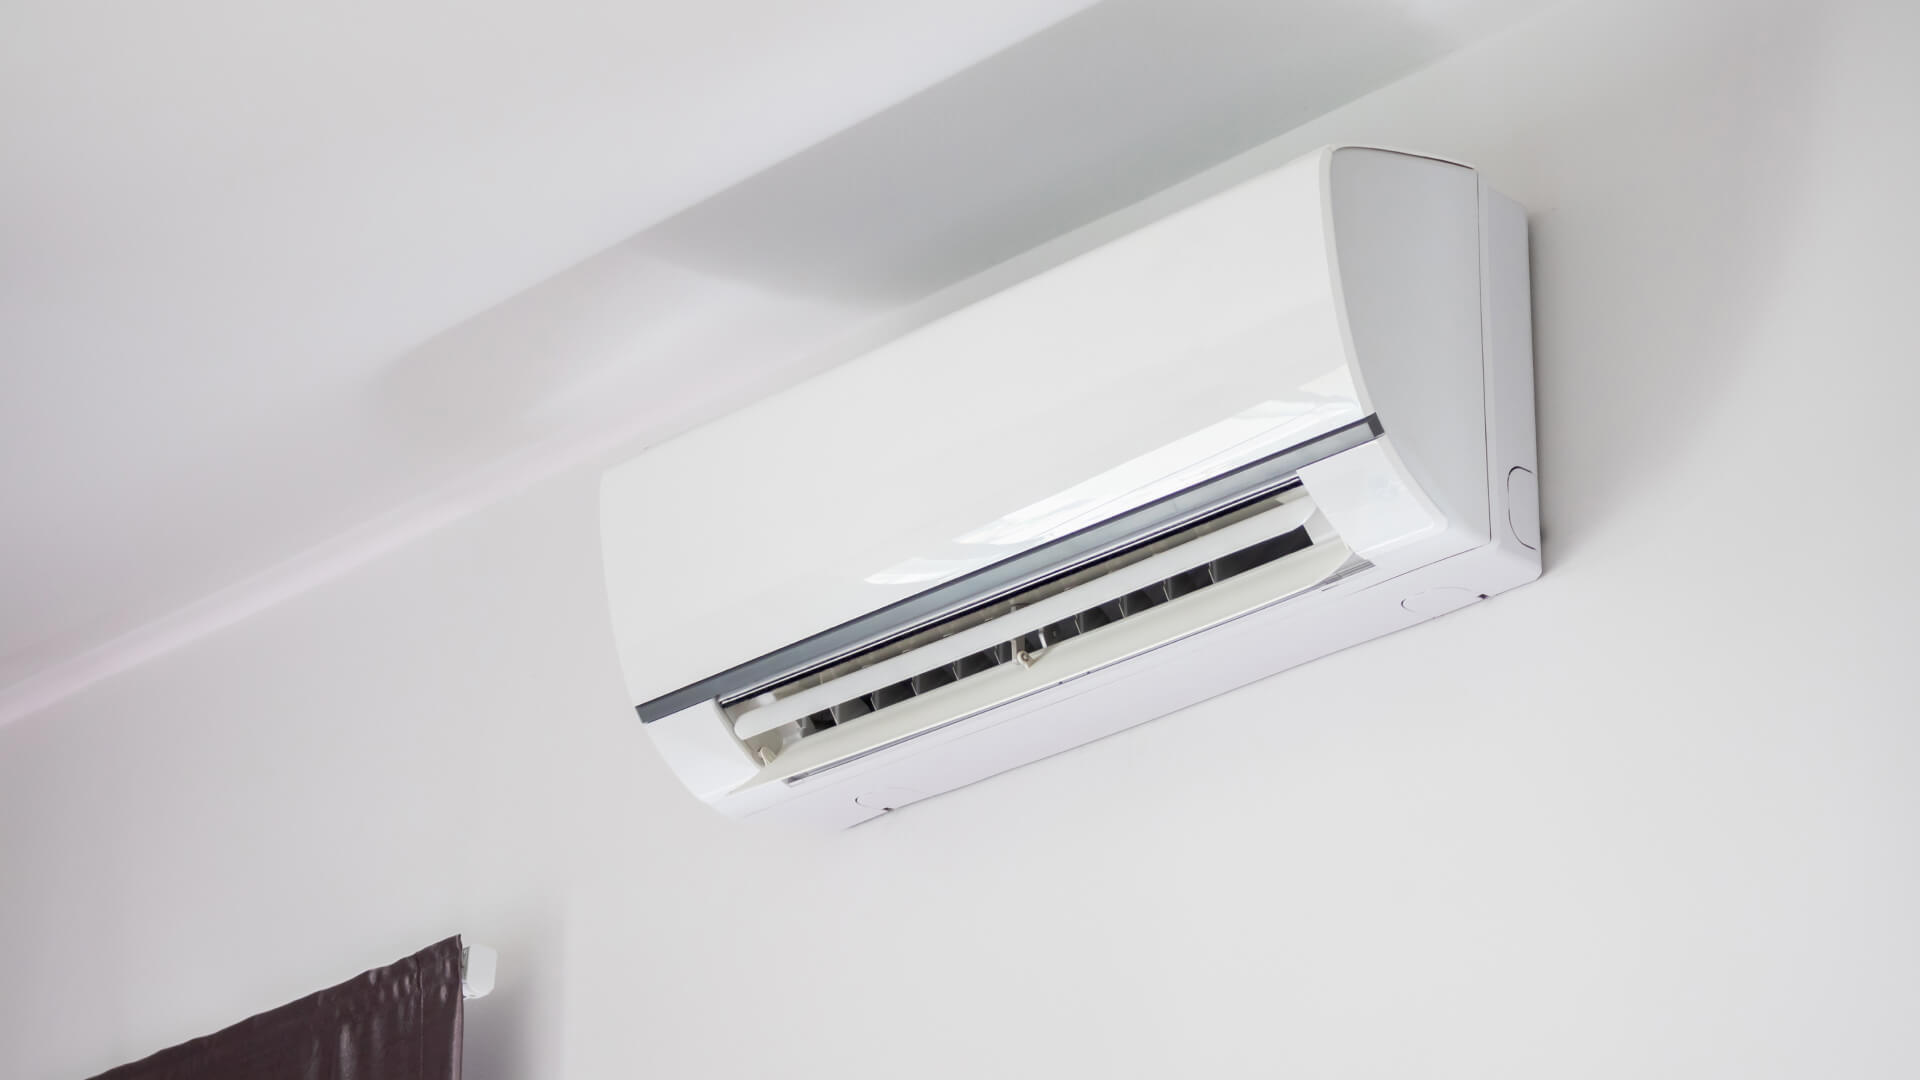 A split-system air conditioner hanging on the wall in a room on the Sunshine Coast.